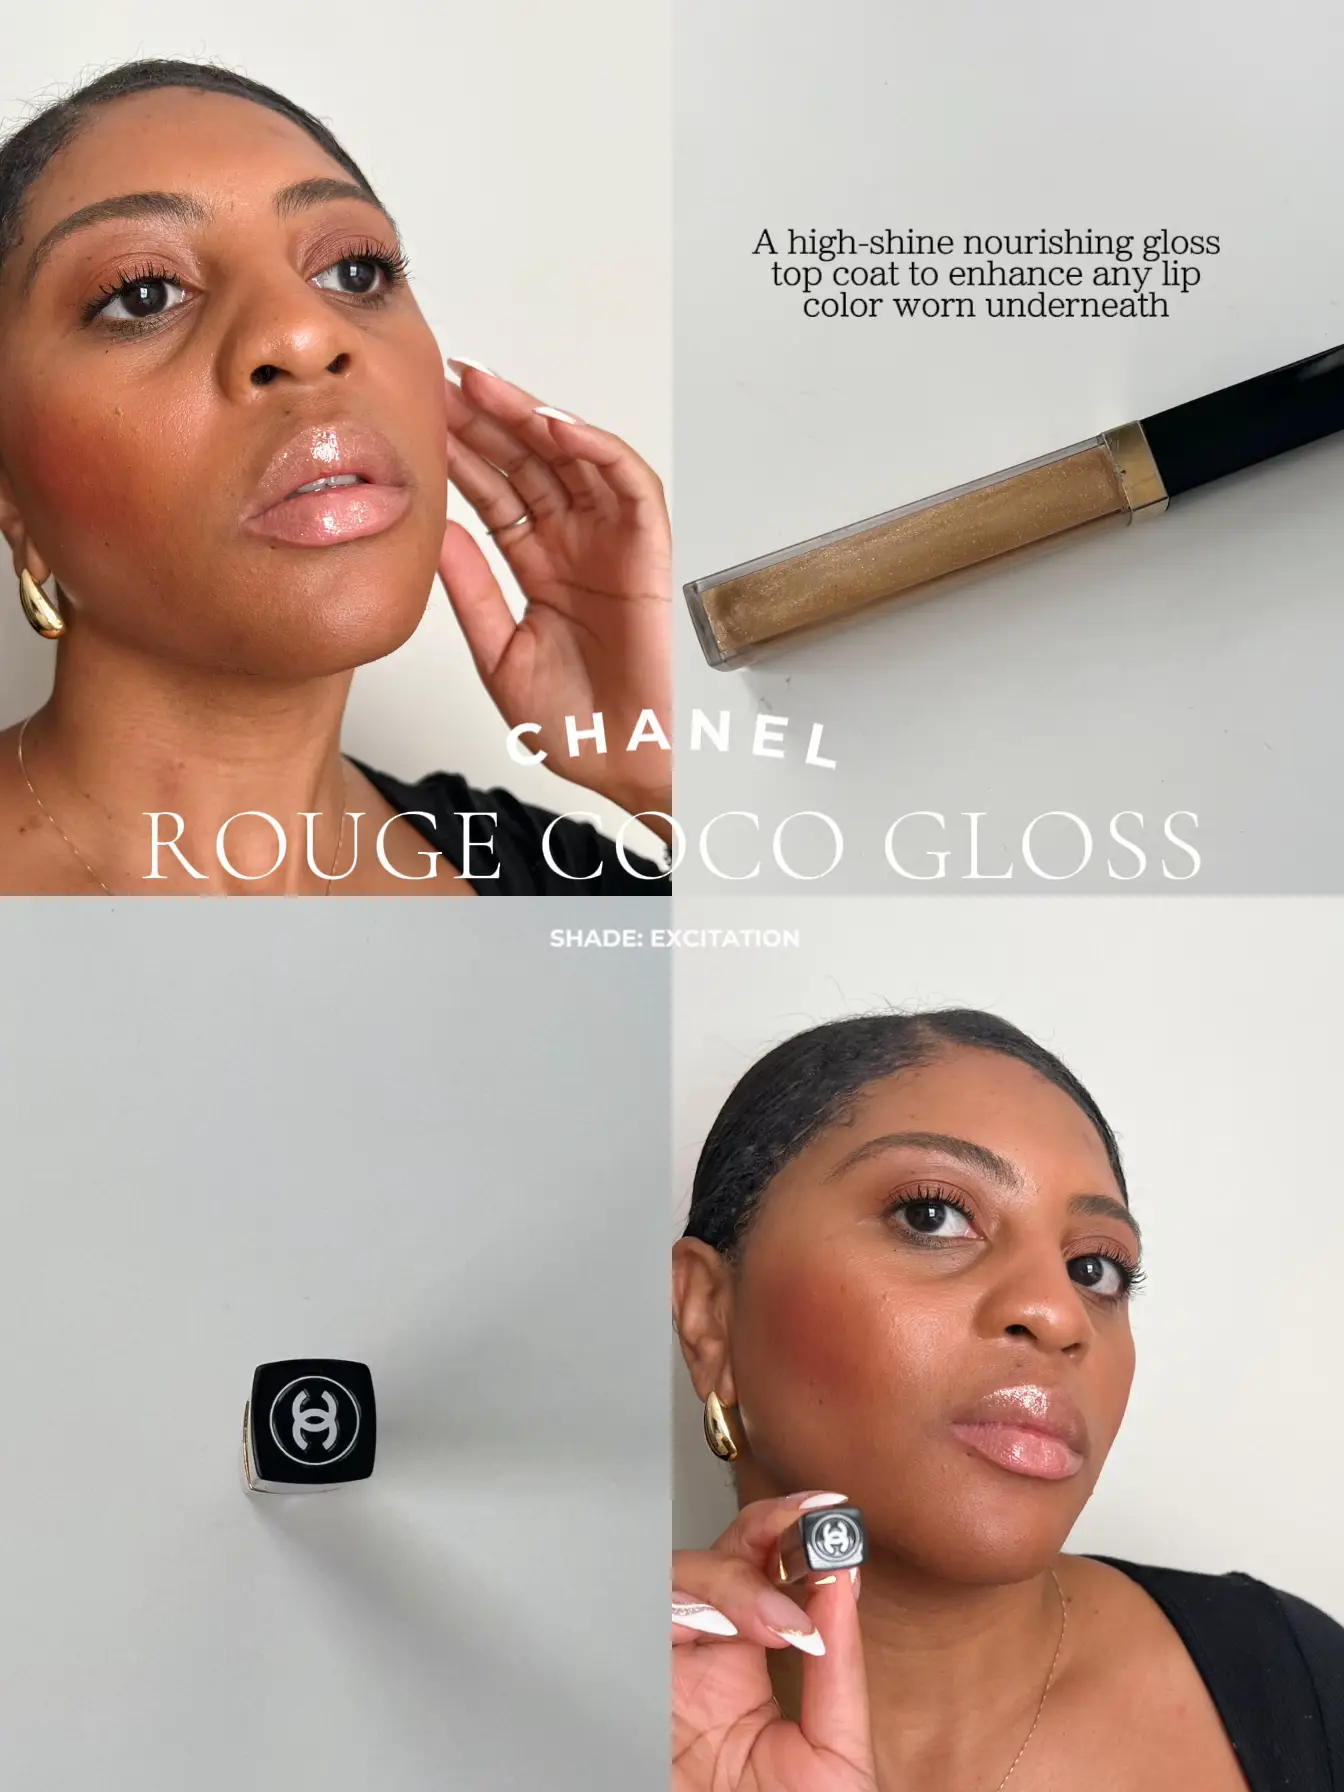 CHANEL · Rouge Coco Flash